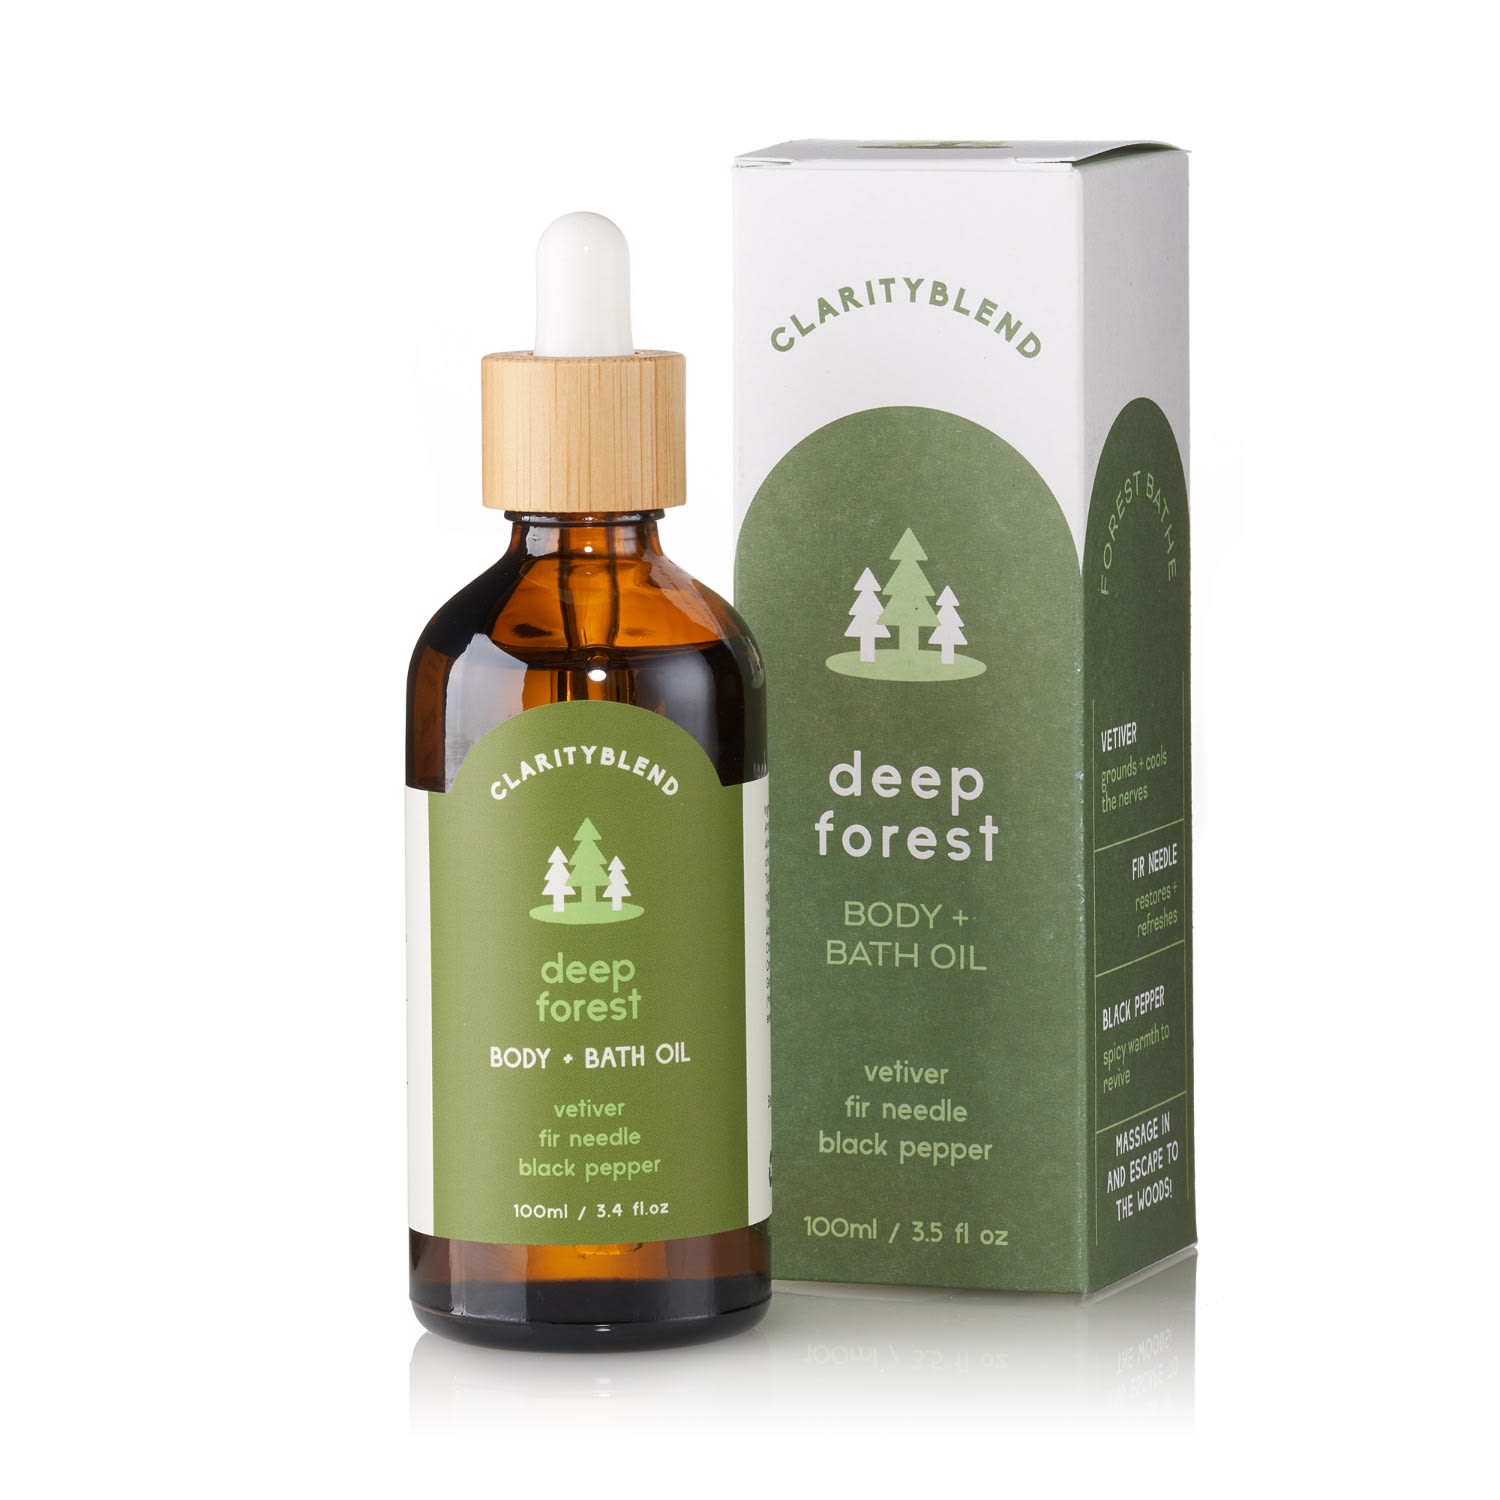 Deep Forest Body & Bath Oil Clarity Blend Aromatherapy